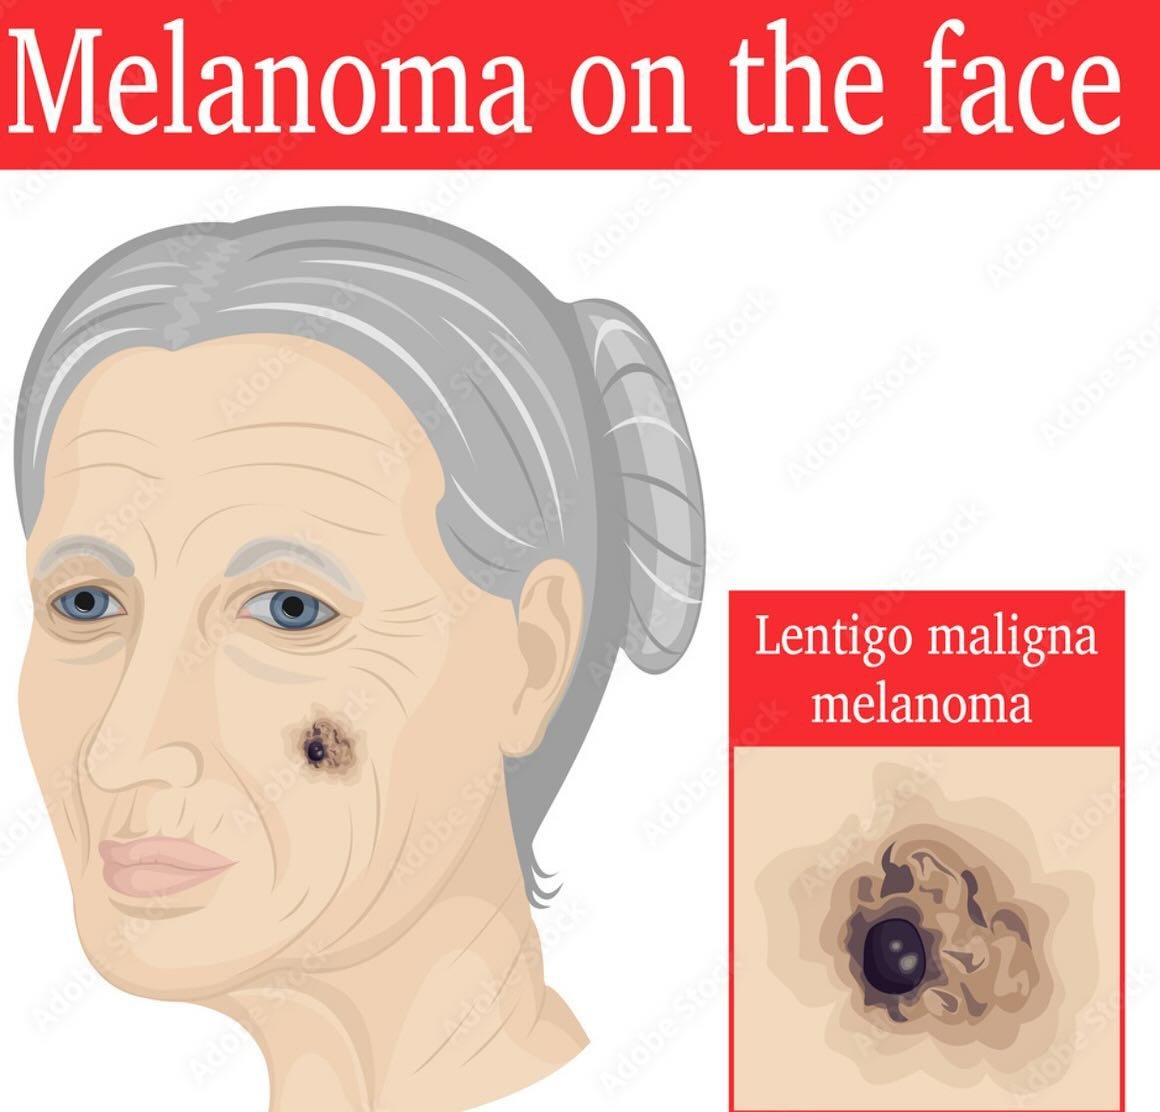 Lentigo Melanoma

There is a special kind of melanoma that develops on the face and very much associated with sun-exposure called lentigo maligna. It usually starts with a brown sunspot (lentigo), that with time becomes more irregularly colored, bord